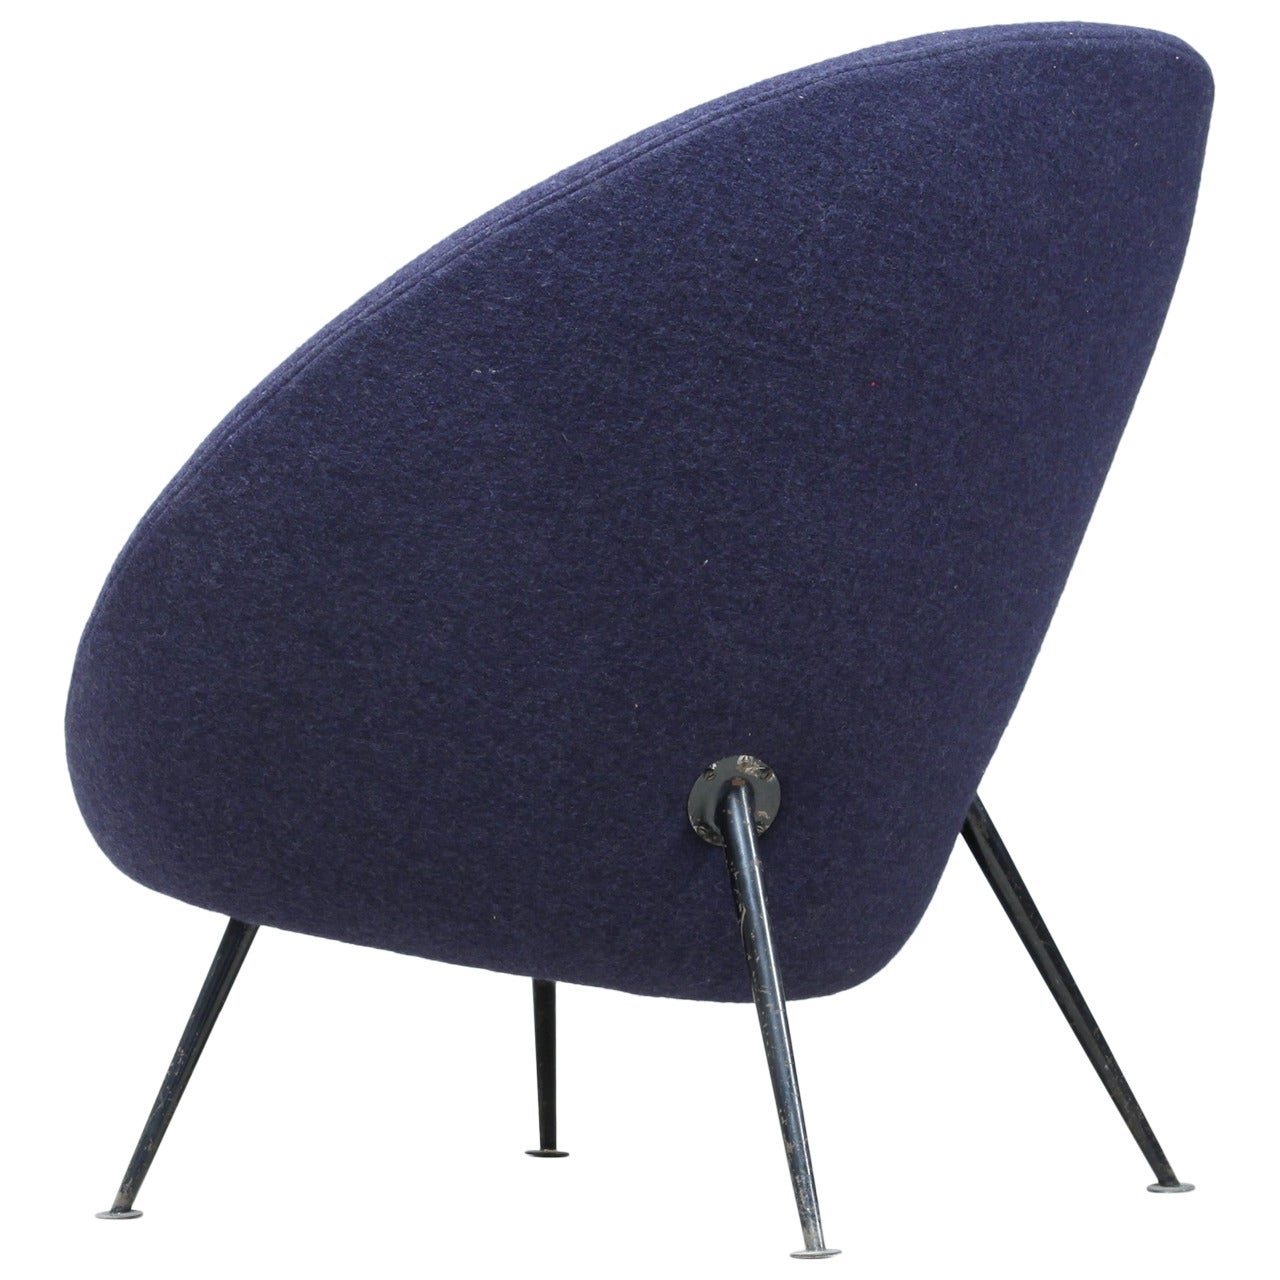 Rare Ico Parisi Egg Chair Model 813 in Original Upholstery, Cassina, Italy, 1950 For Sale